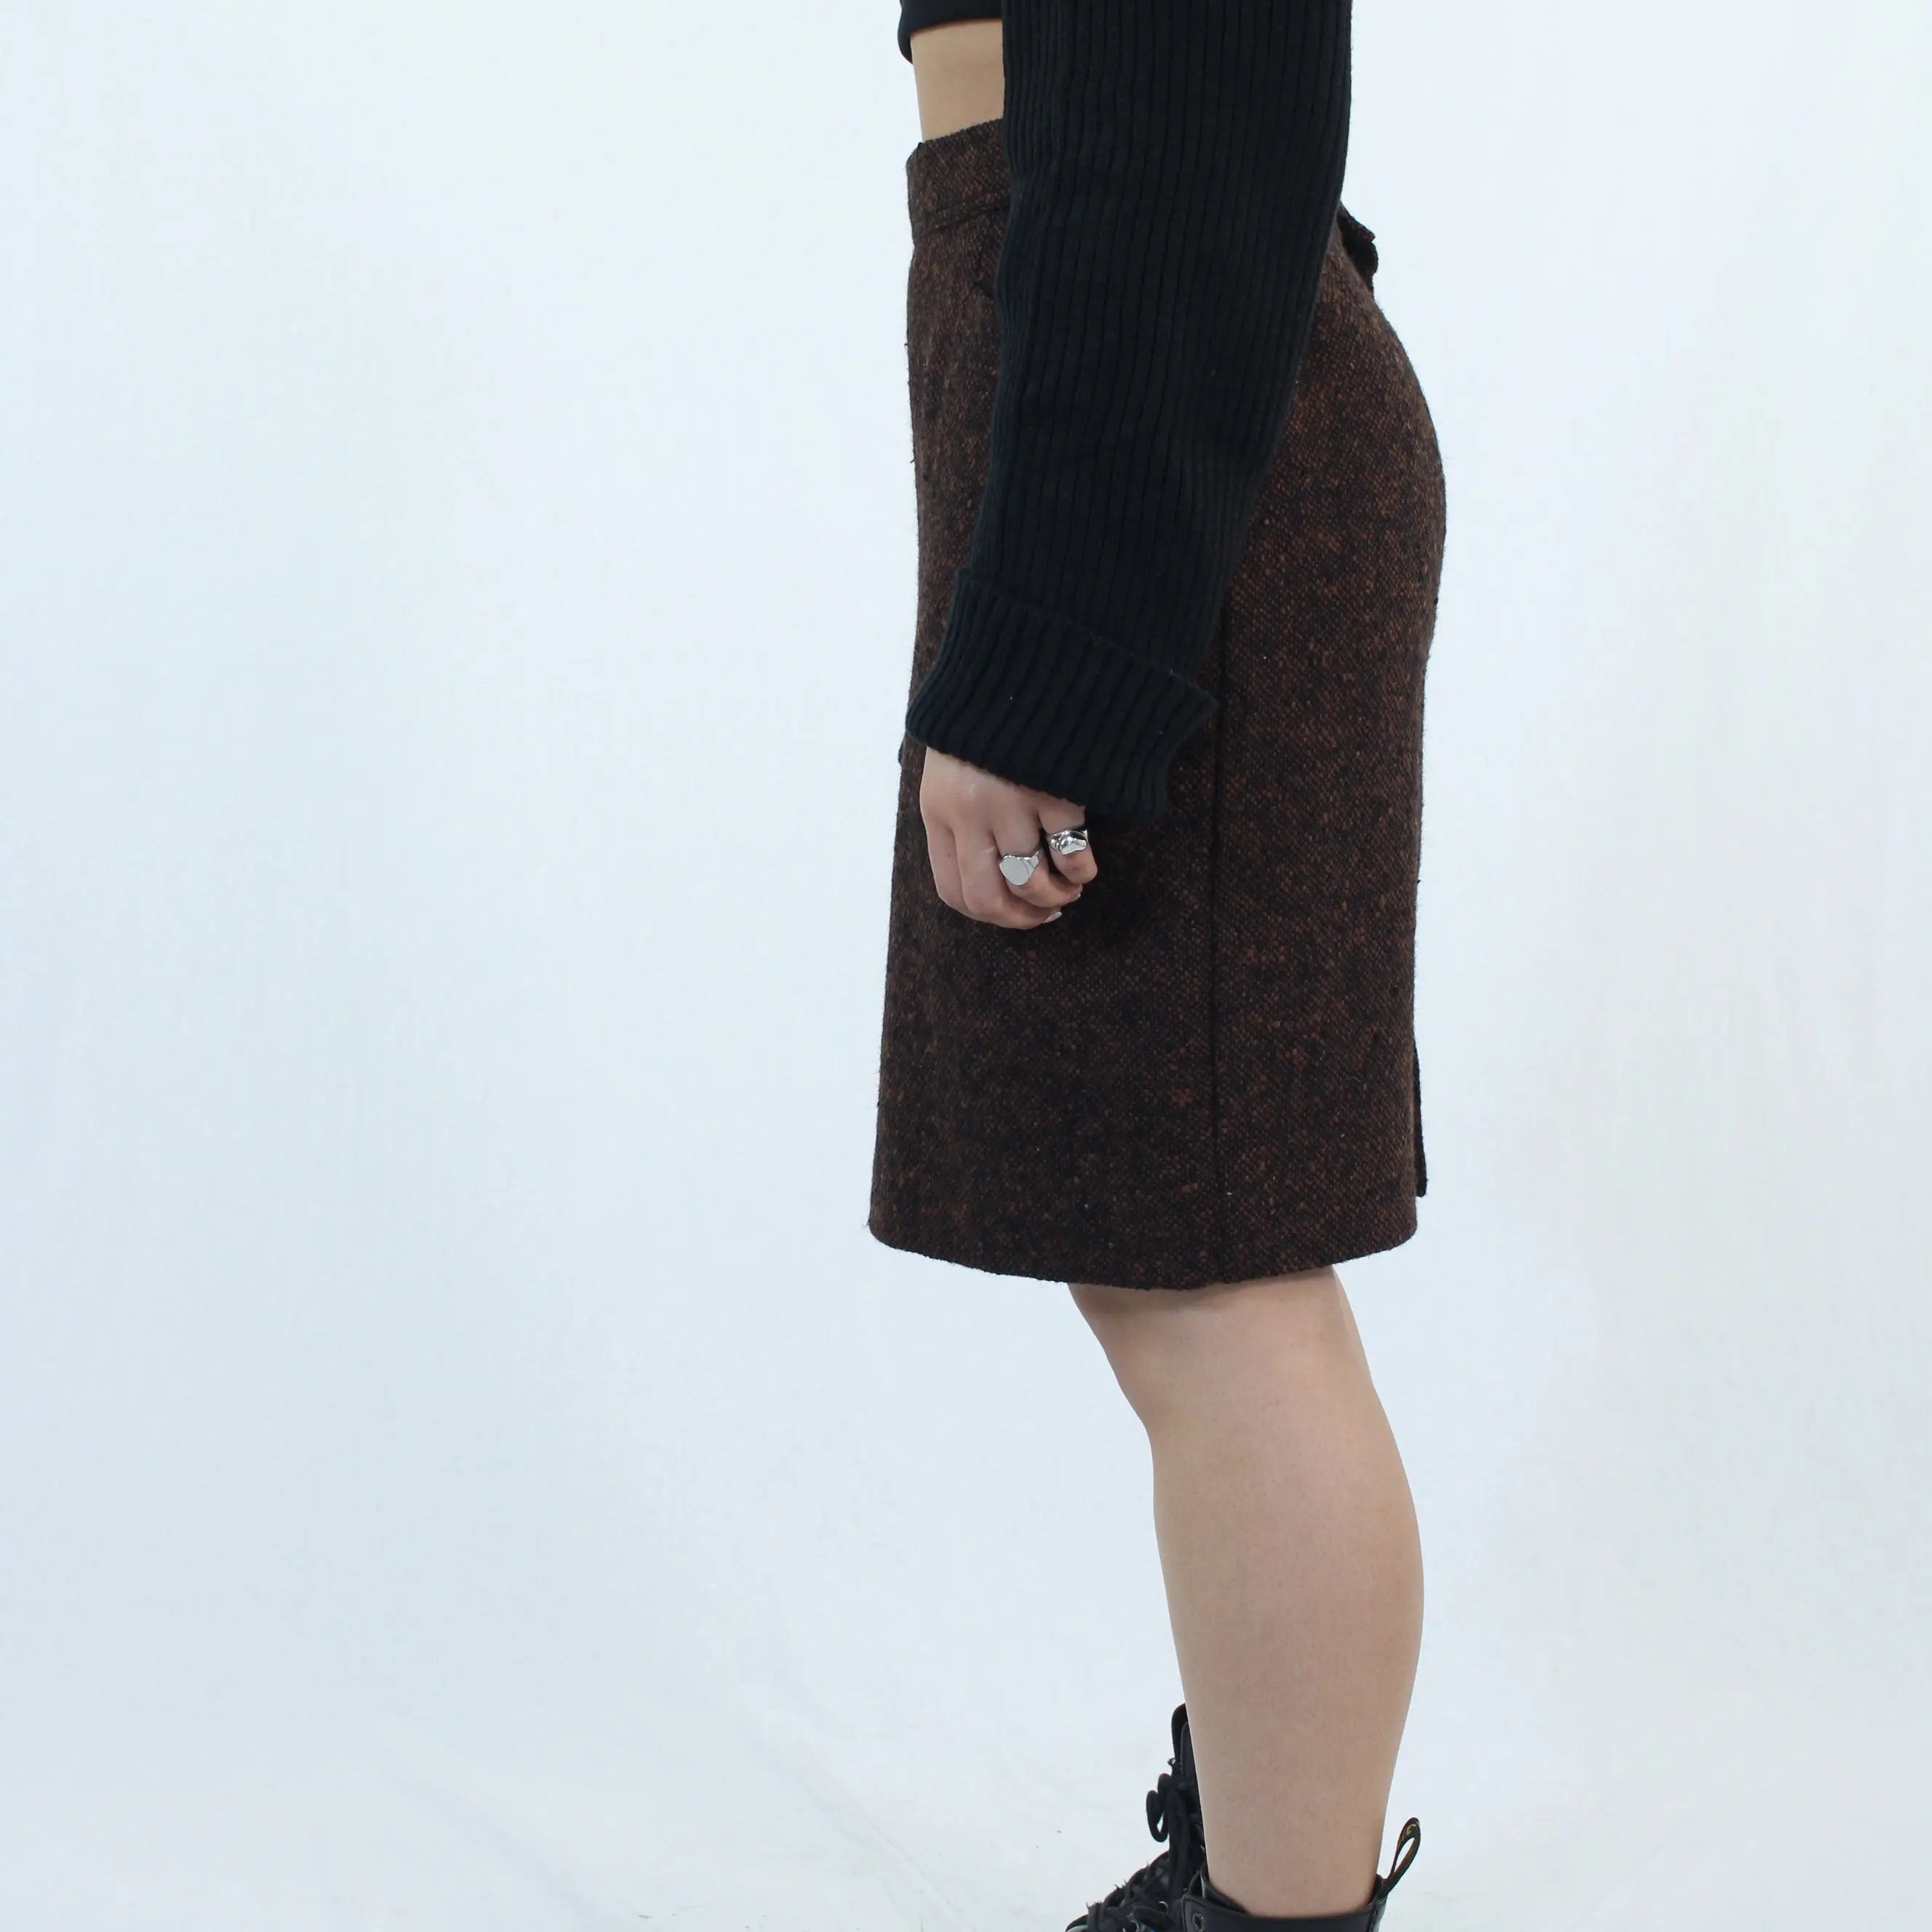 Krizia - 100% Wool Skirt by Krizia- ThriftTale.com - Vintage and second handclothing